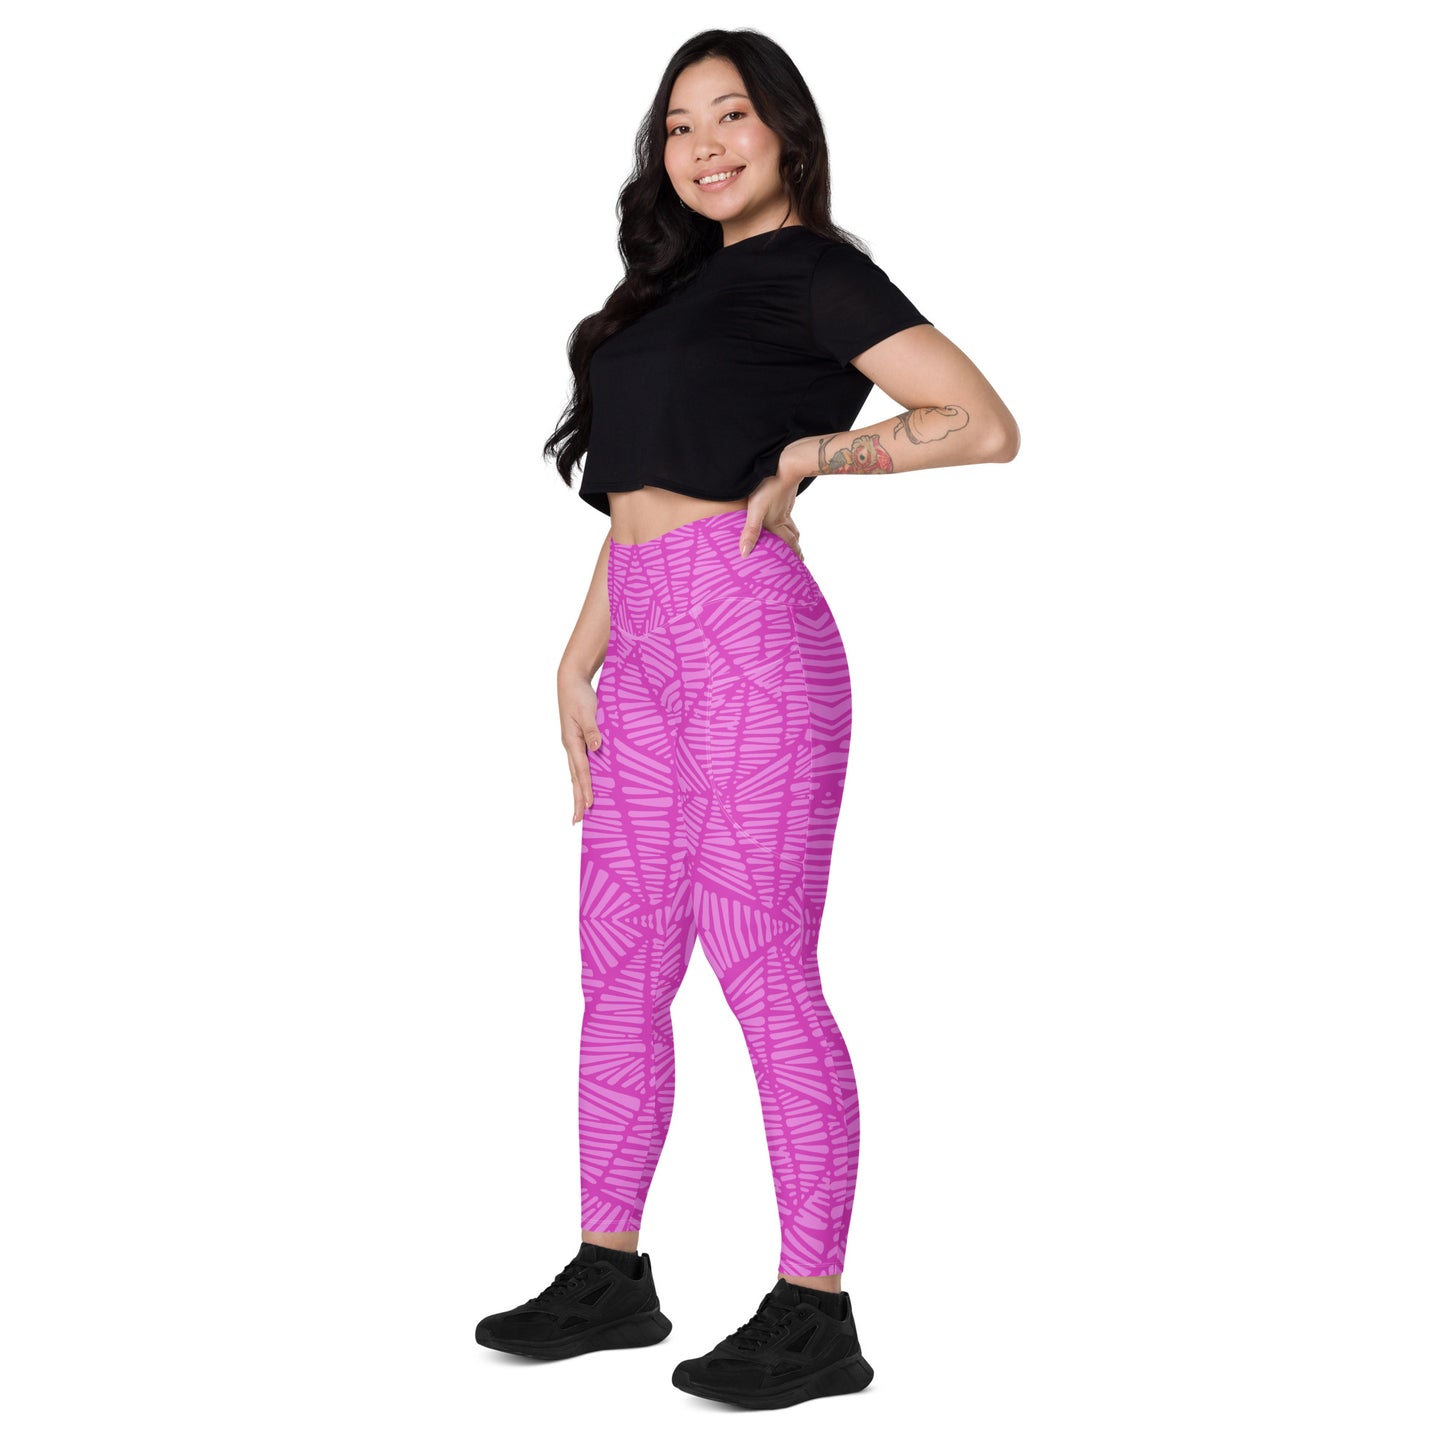 Orchid Zebra Leggings with pockets